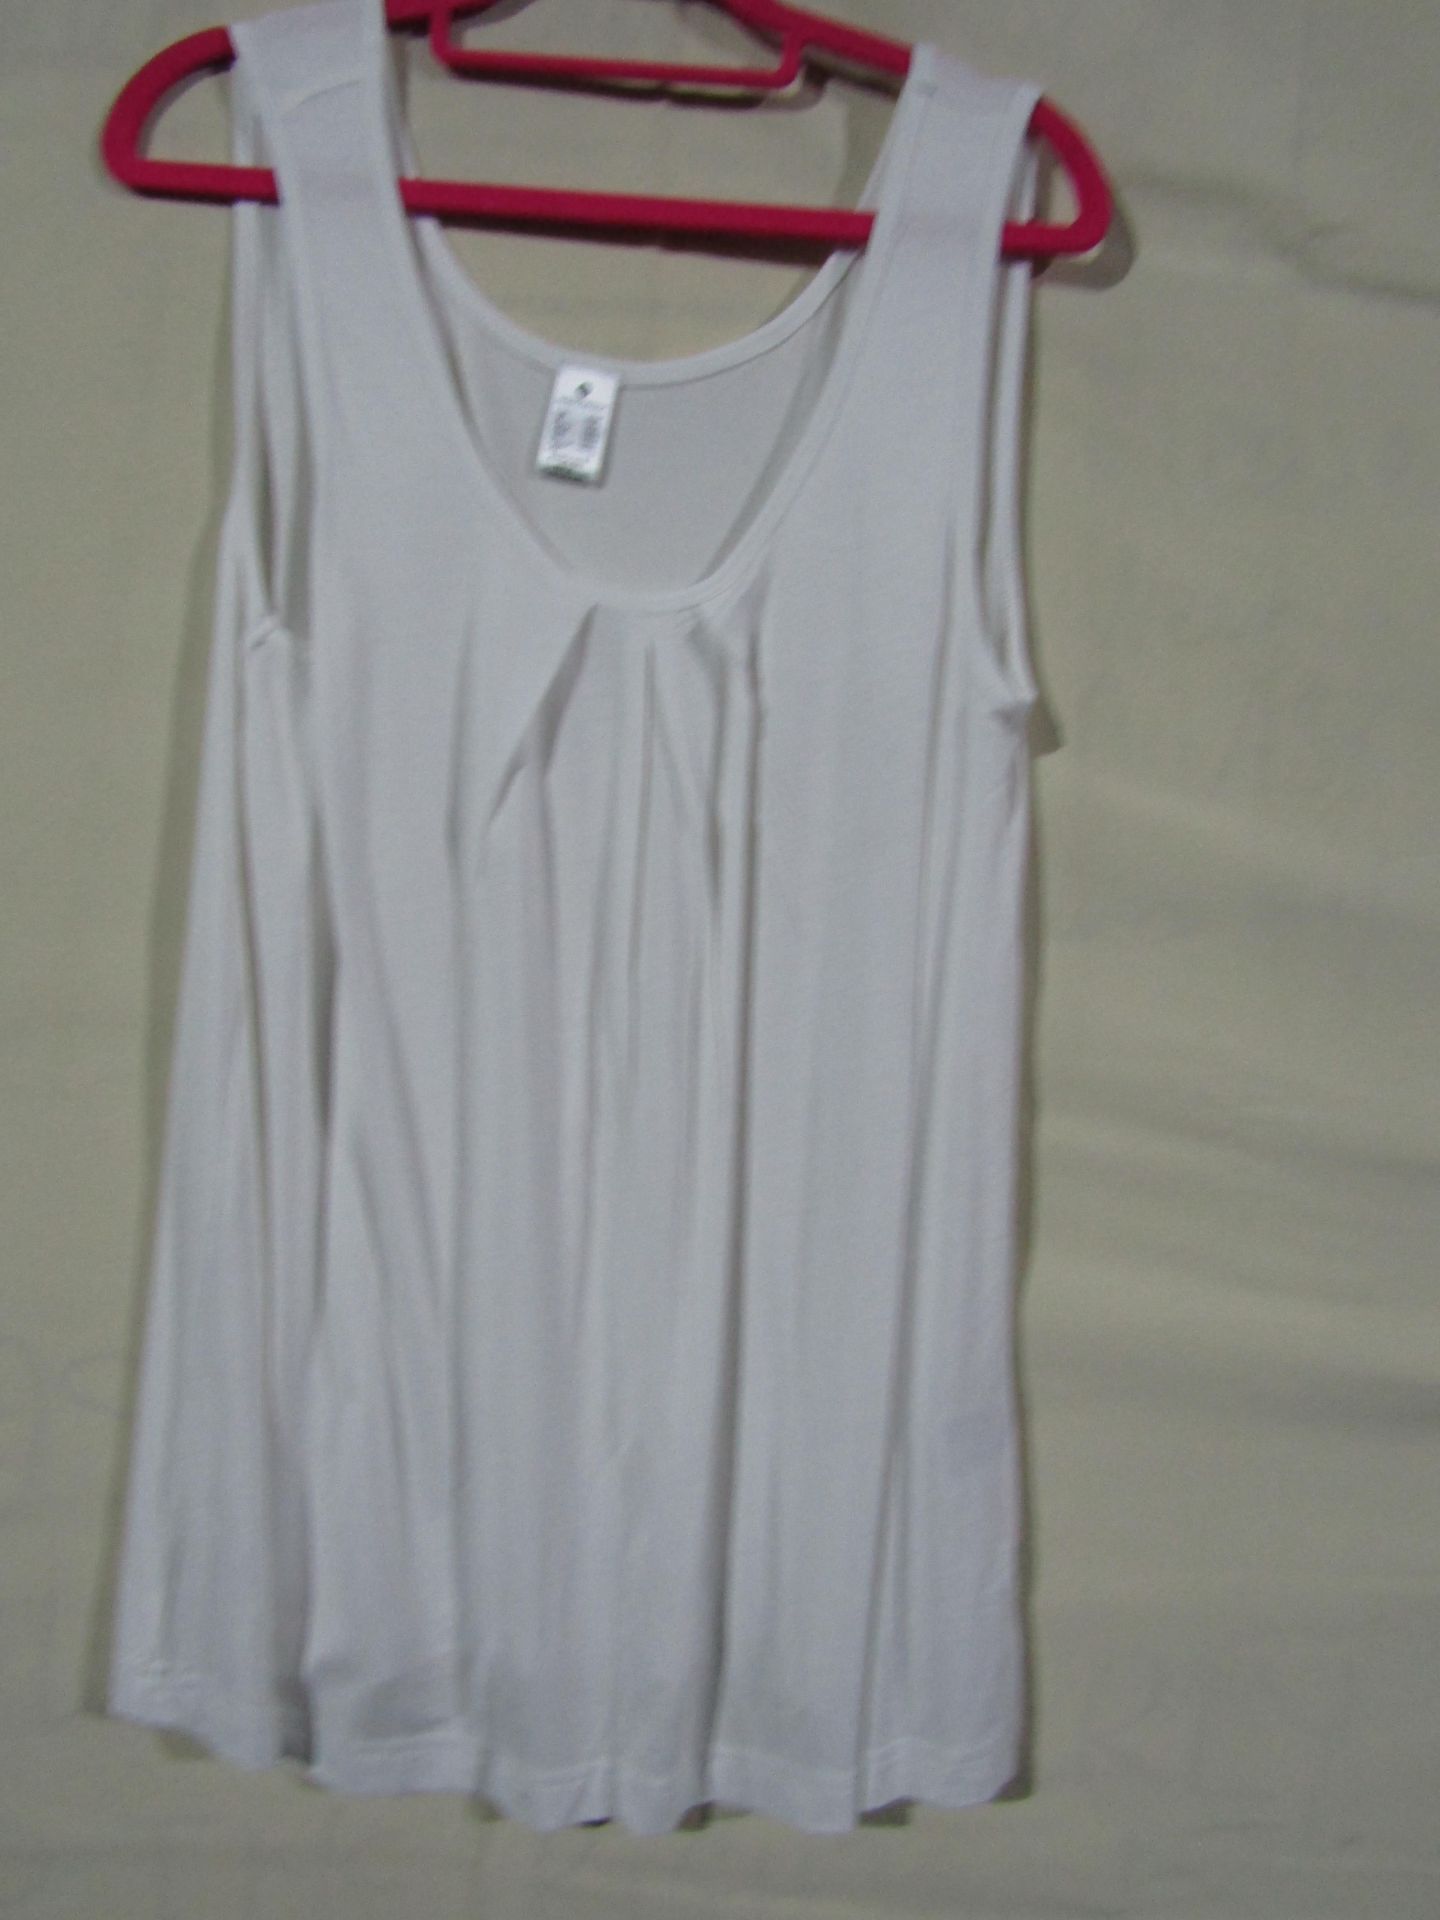 Unbranded Top Ladies Size 10/12 White New nO Tags